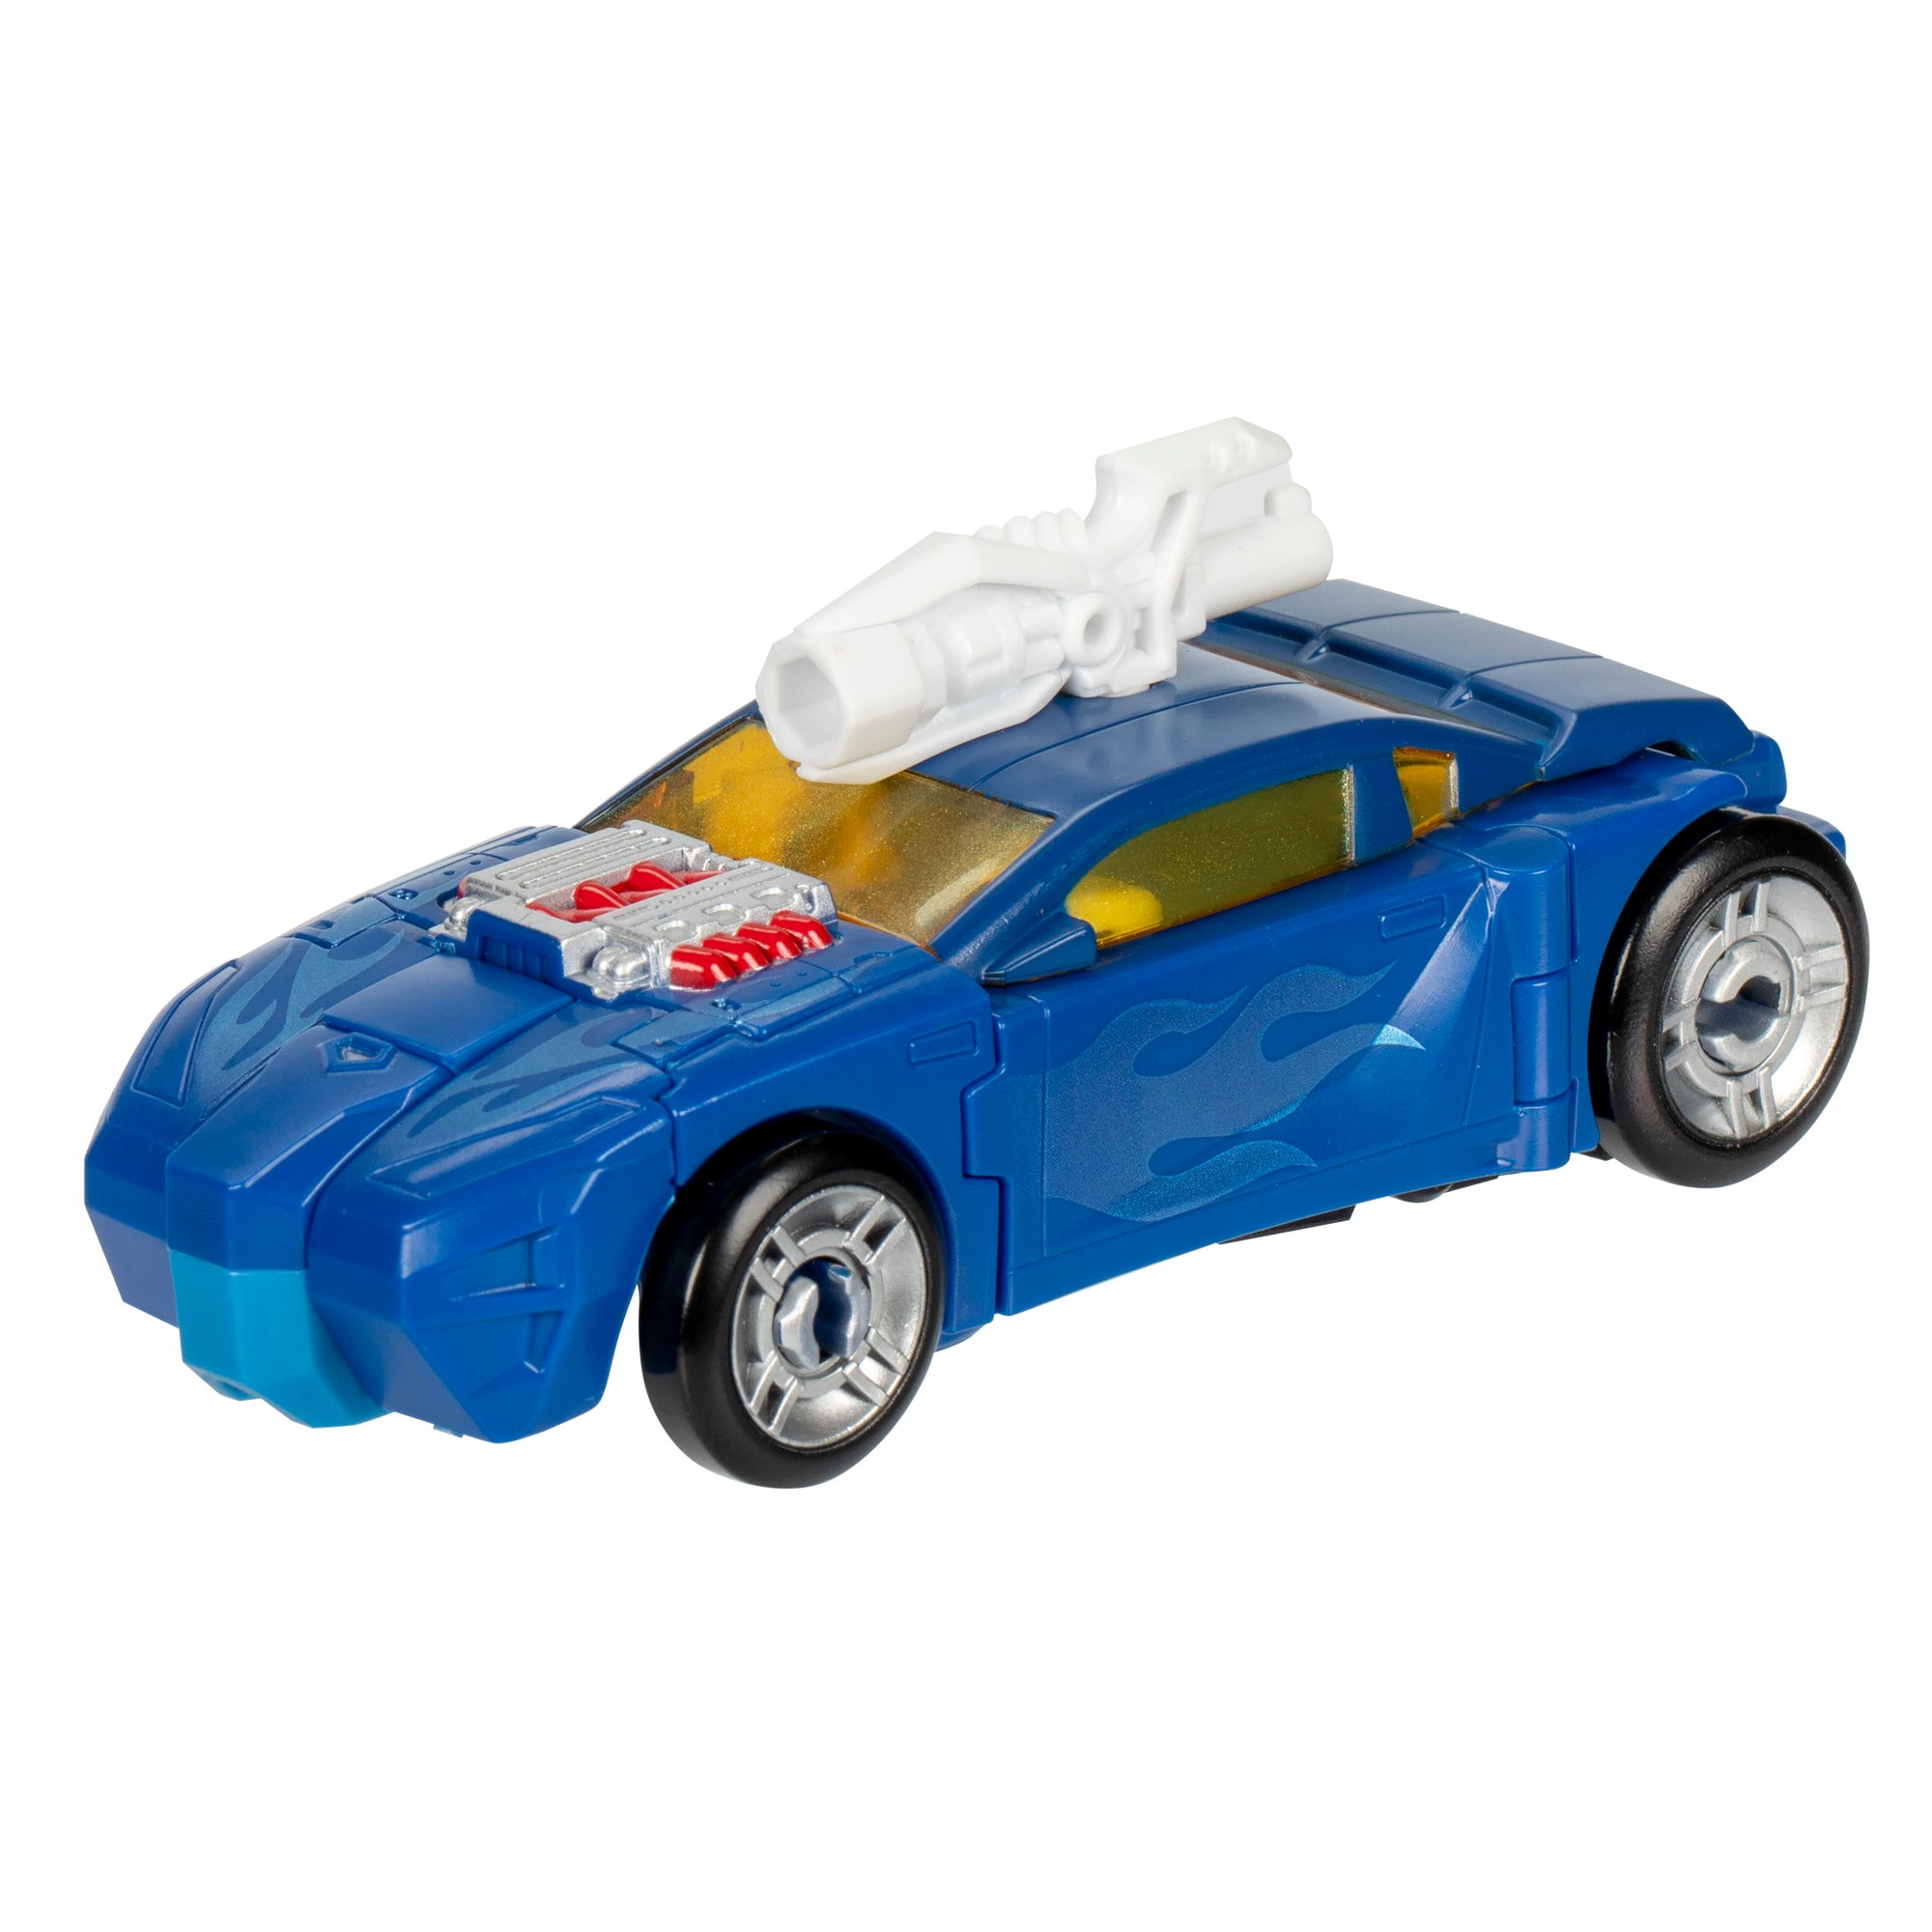 Transformers Studios Series Deluxe: Transformers Robots In Disguise - Autobot Side Burn